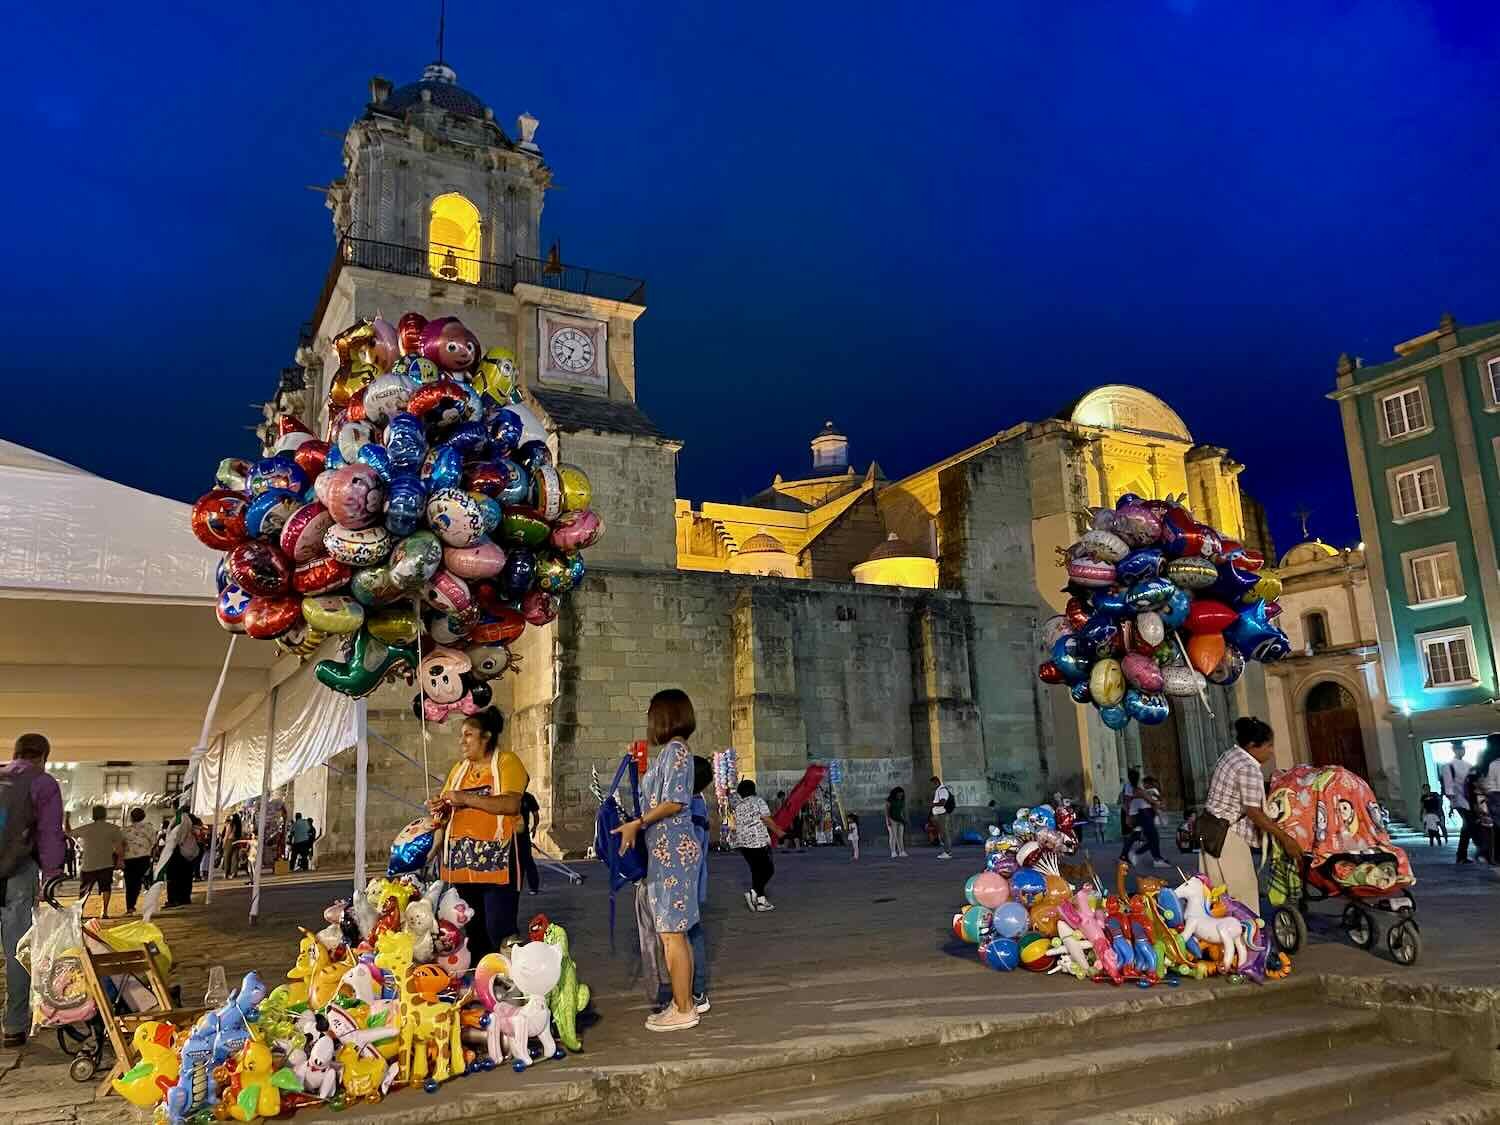 Every evening the Plaza de la Constitución was packed with people, and vendors hoping for a sale